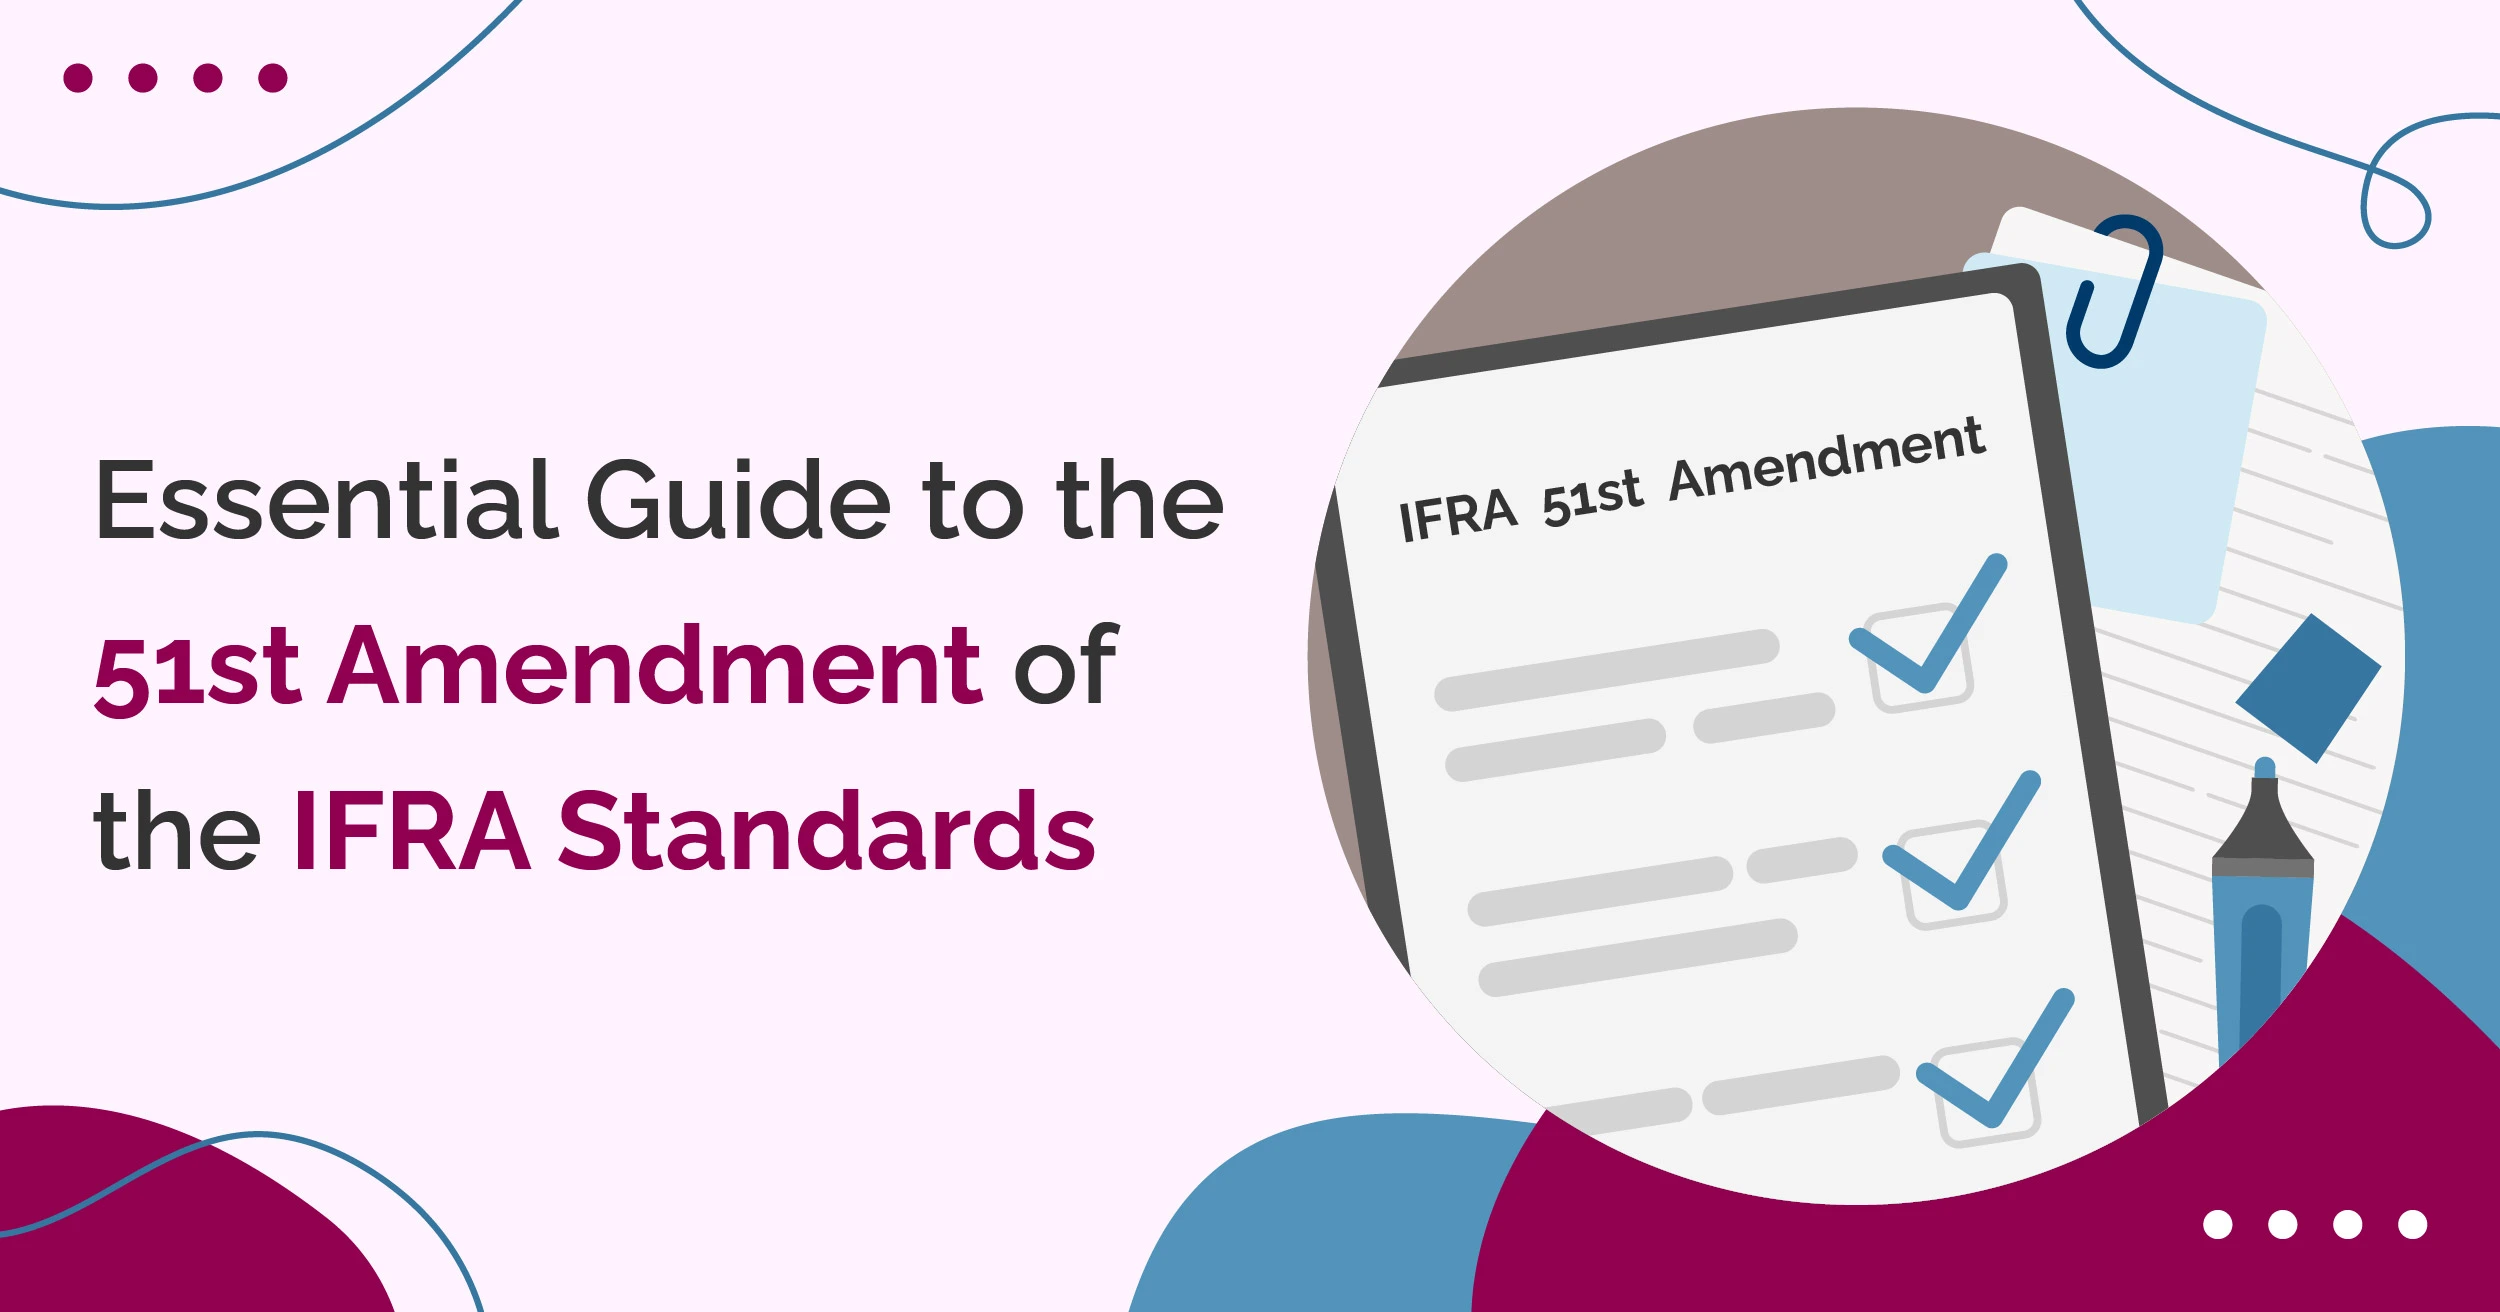 Essential Guide to the 51st Amendment of the IFRA Standards